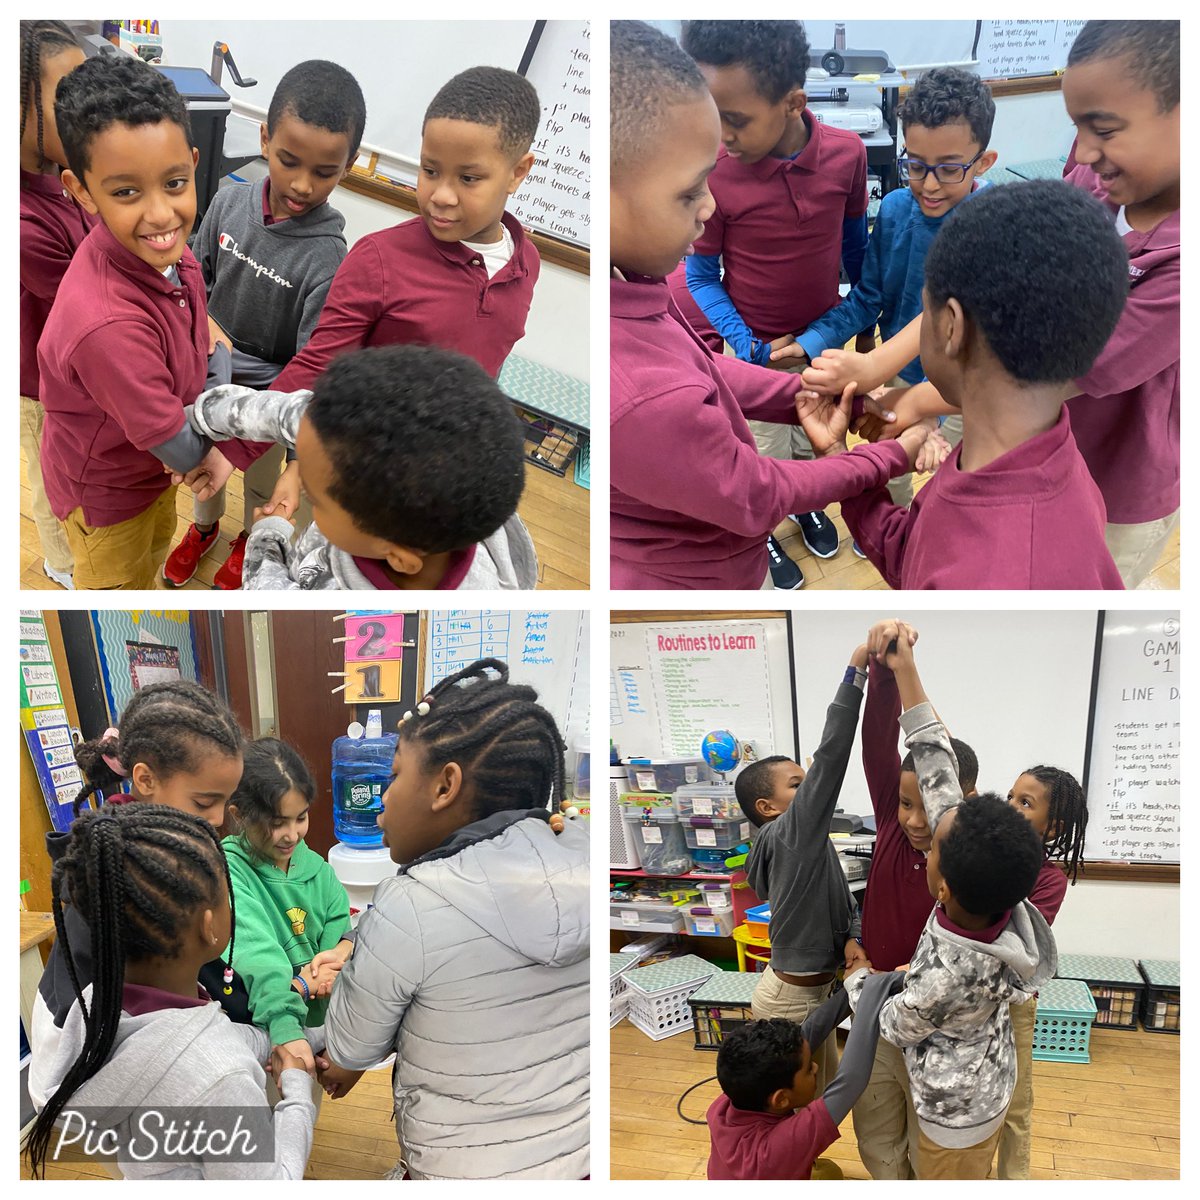 Team building games like the human knot are a fun indoor recess choice when that New England winter weather keeps us inside! @bbcps